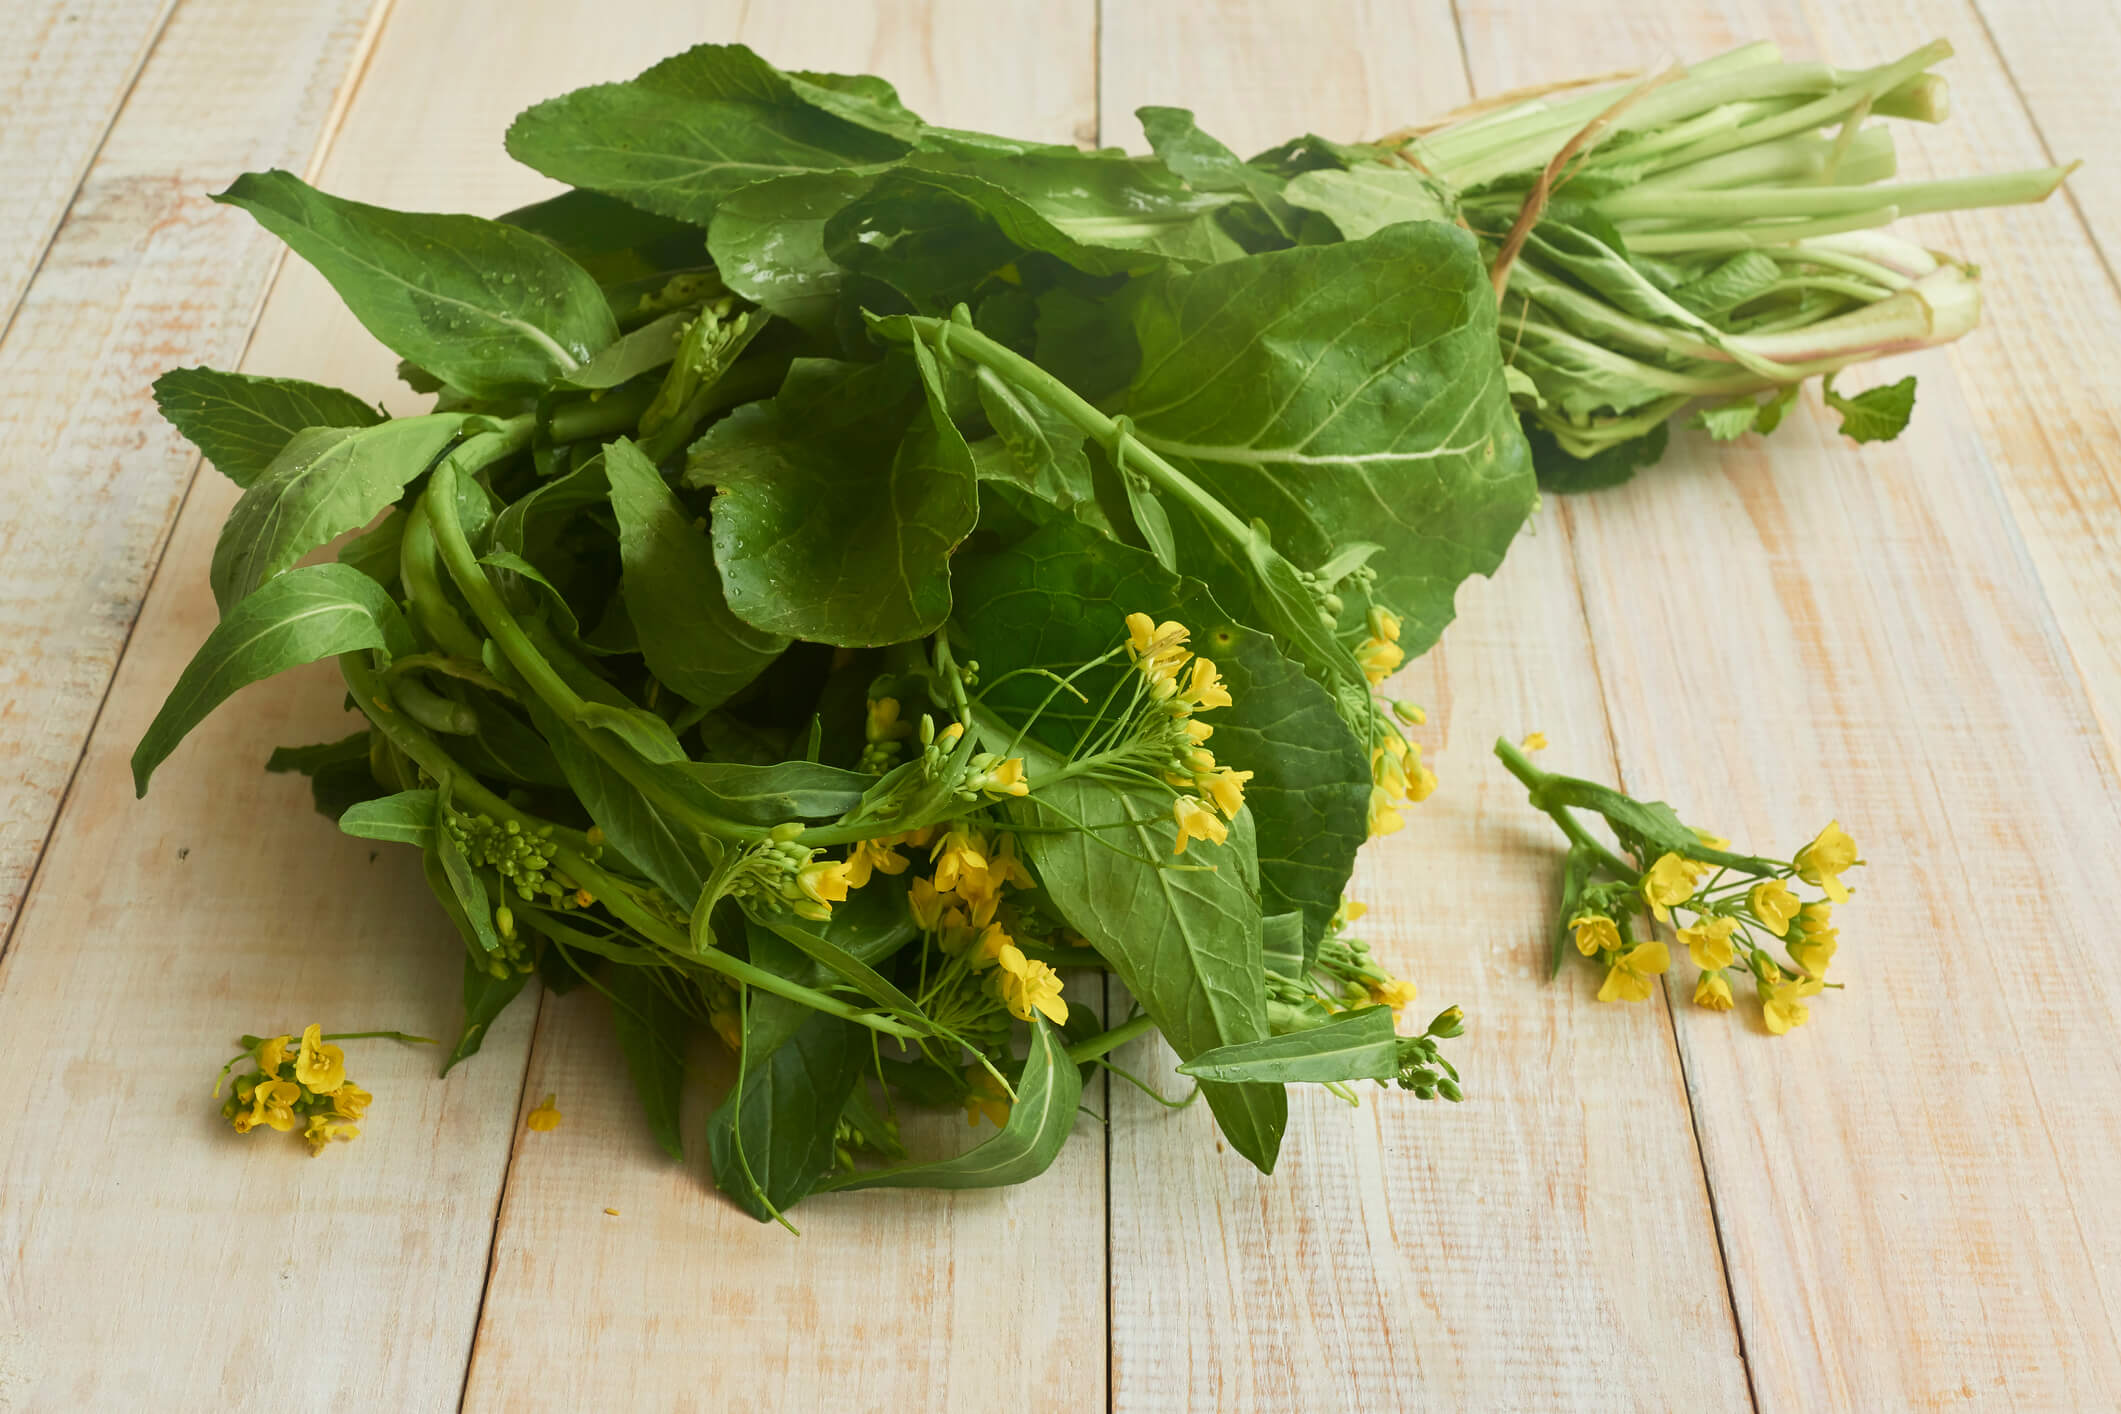 Spring vegetables and fruits: mustard greens